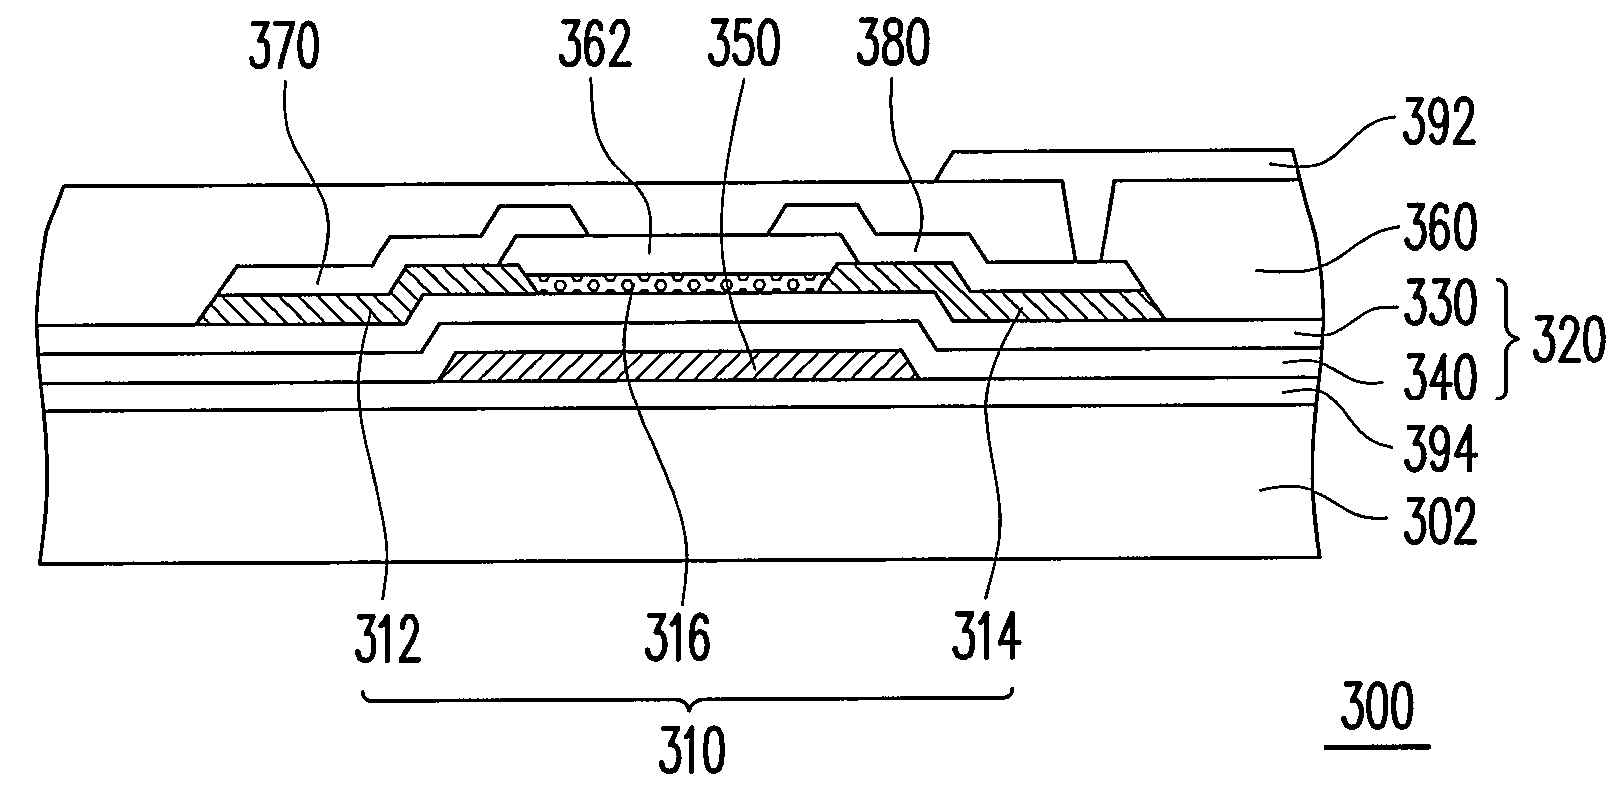 Dielectric layer and thin film transistor